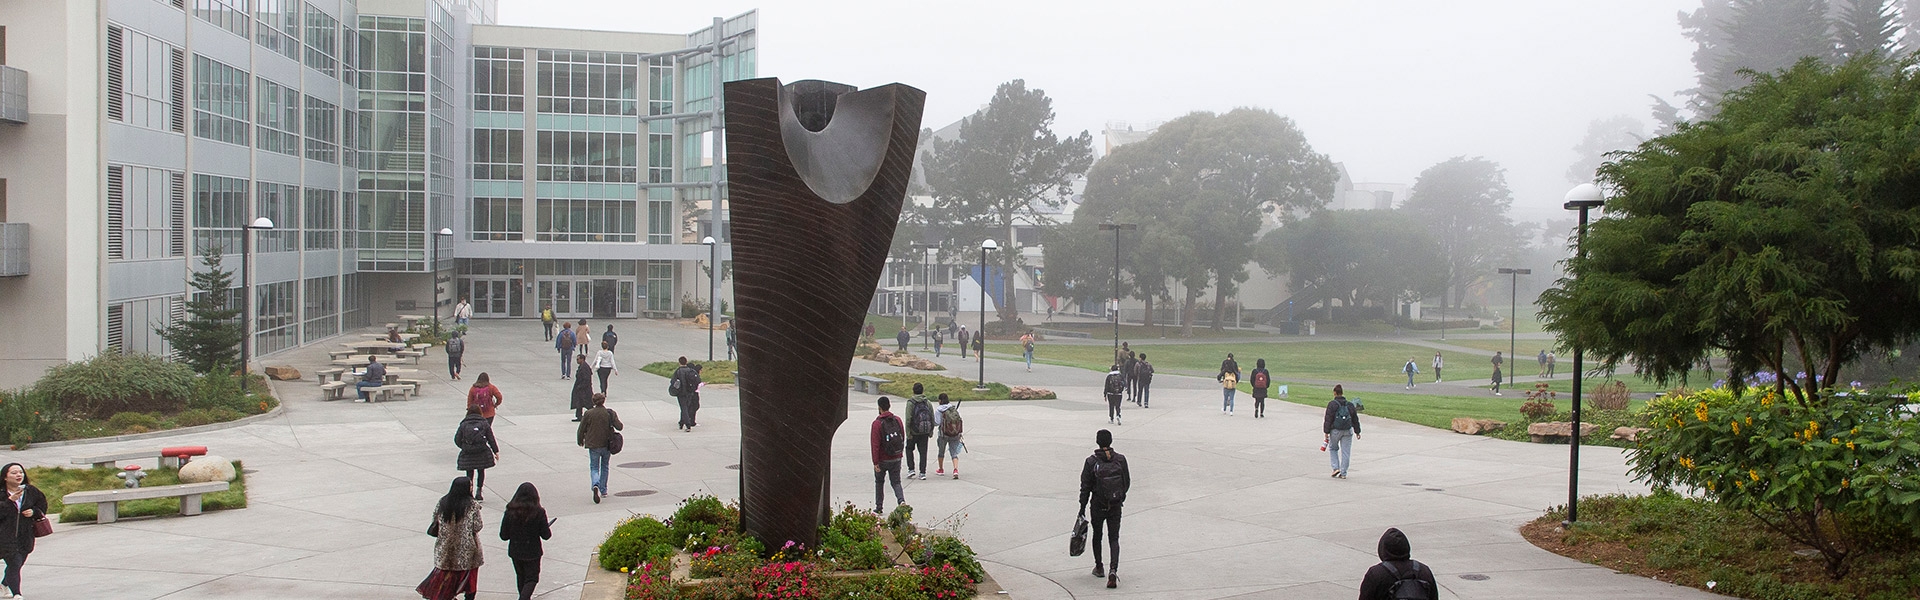 Campus and sculpture in the winter fog